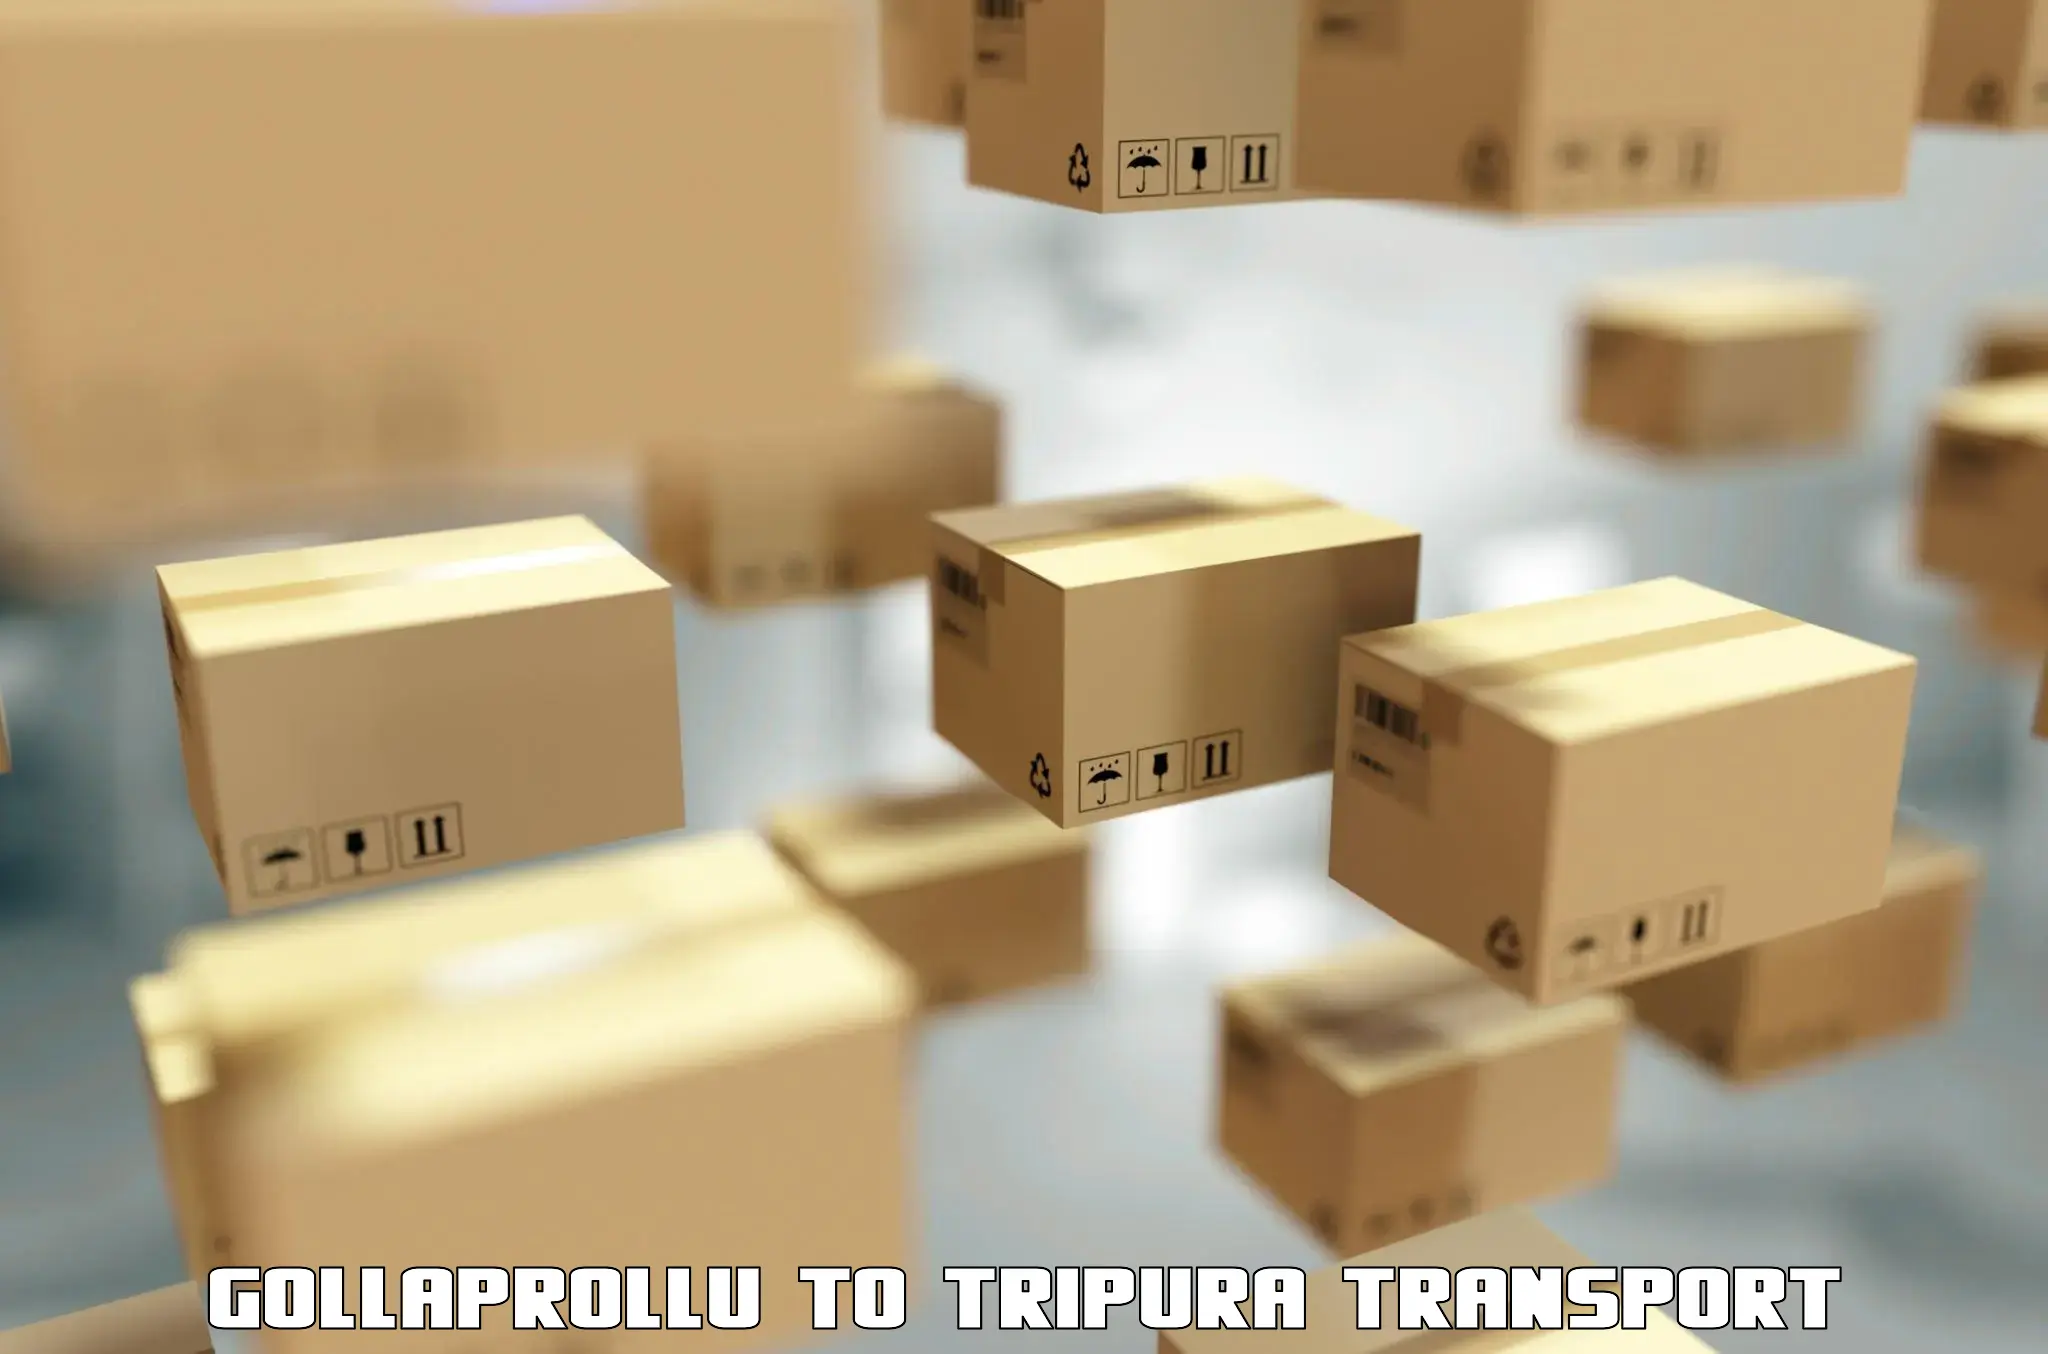 Goods delivery service Gollaprollu to Tripura